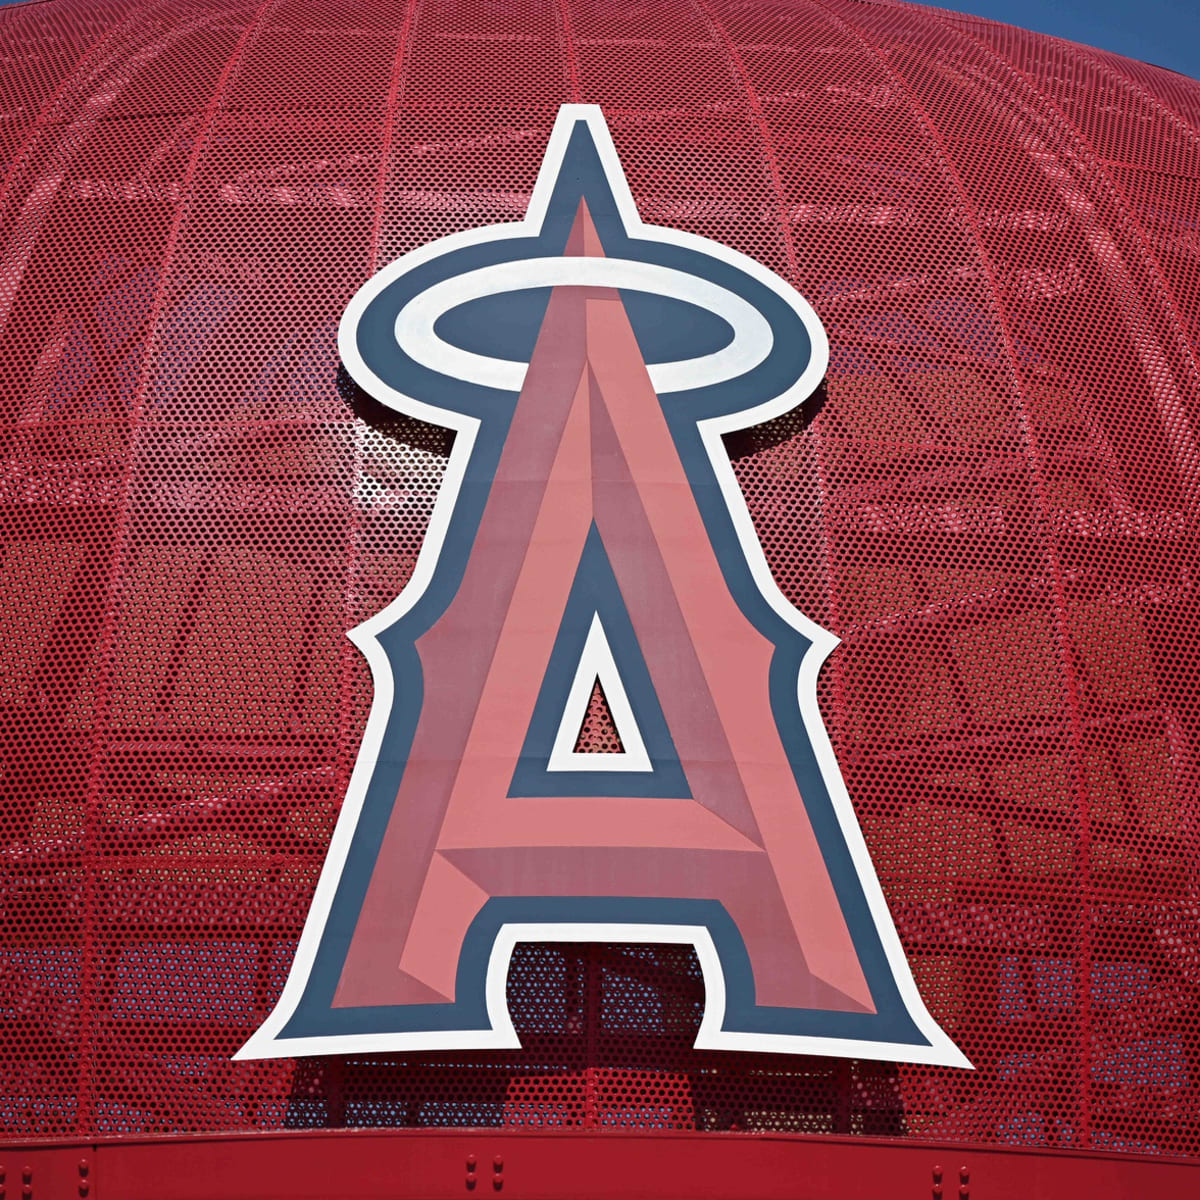 MLB could take over broadcasting of 17 teams, including L.A. Angels